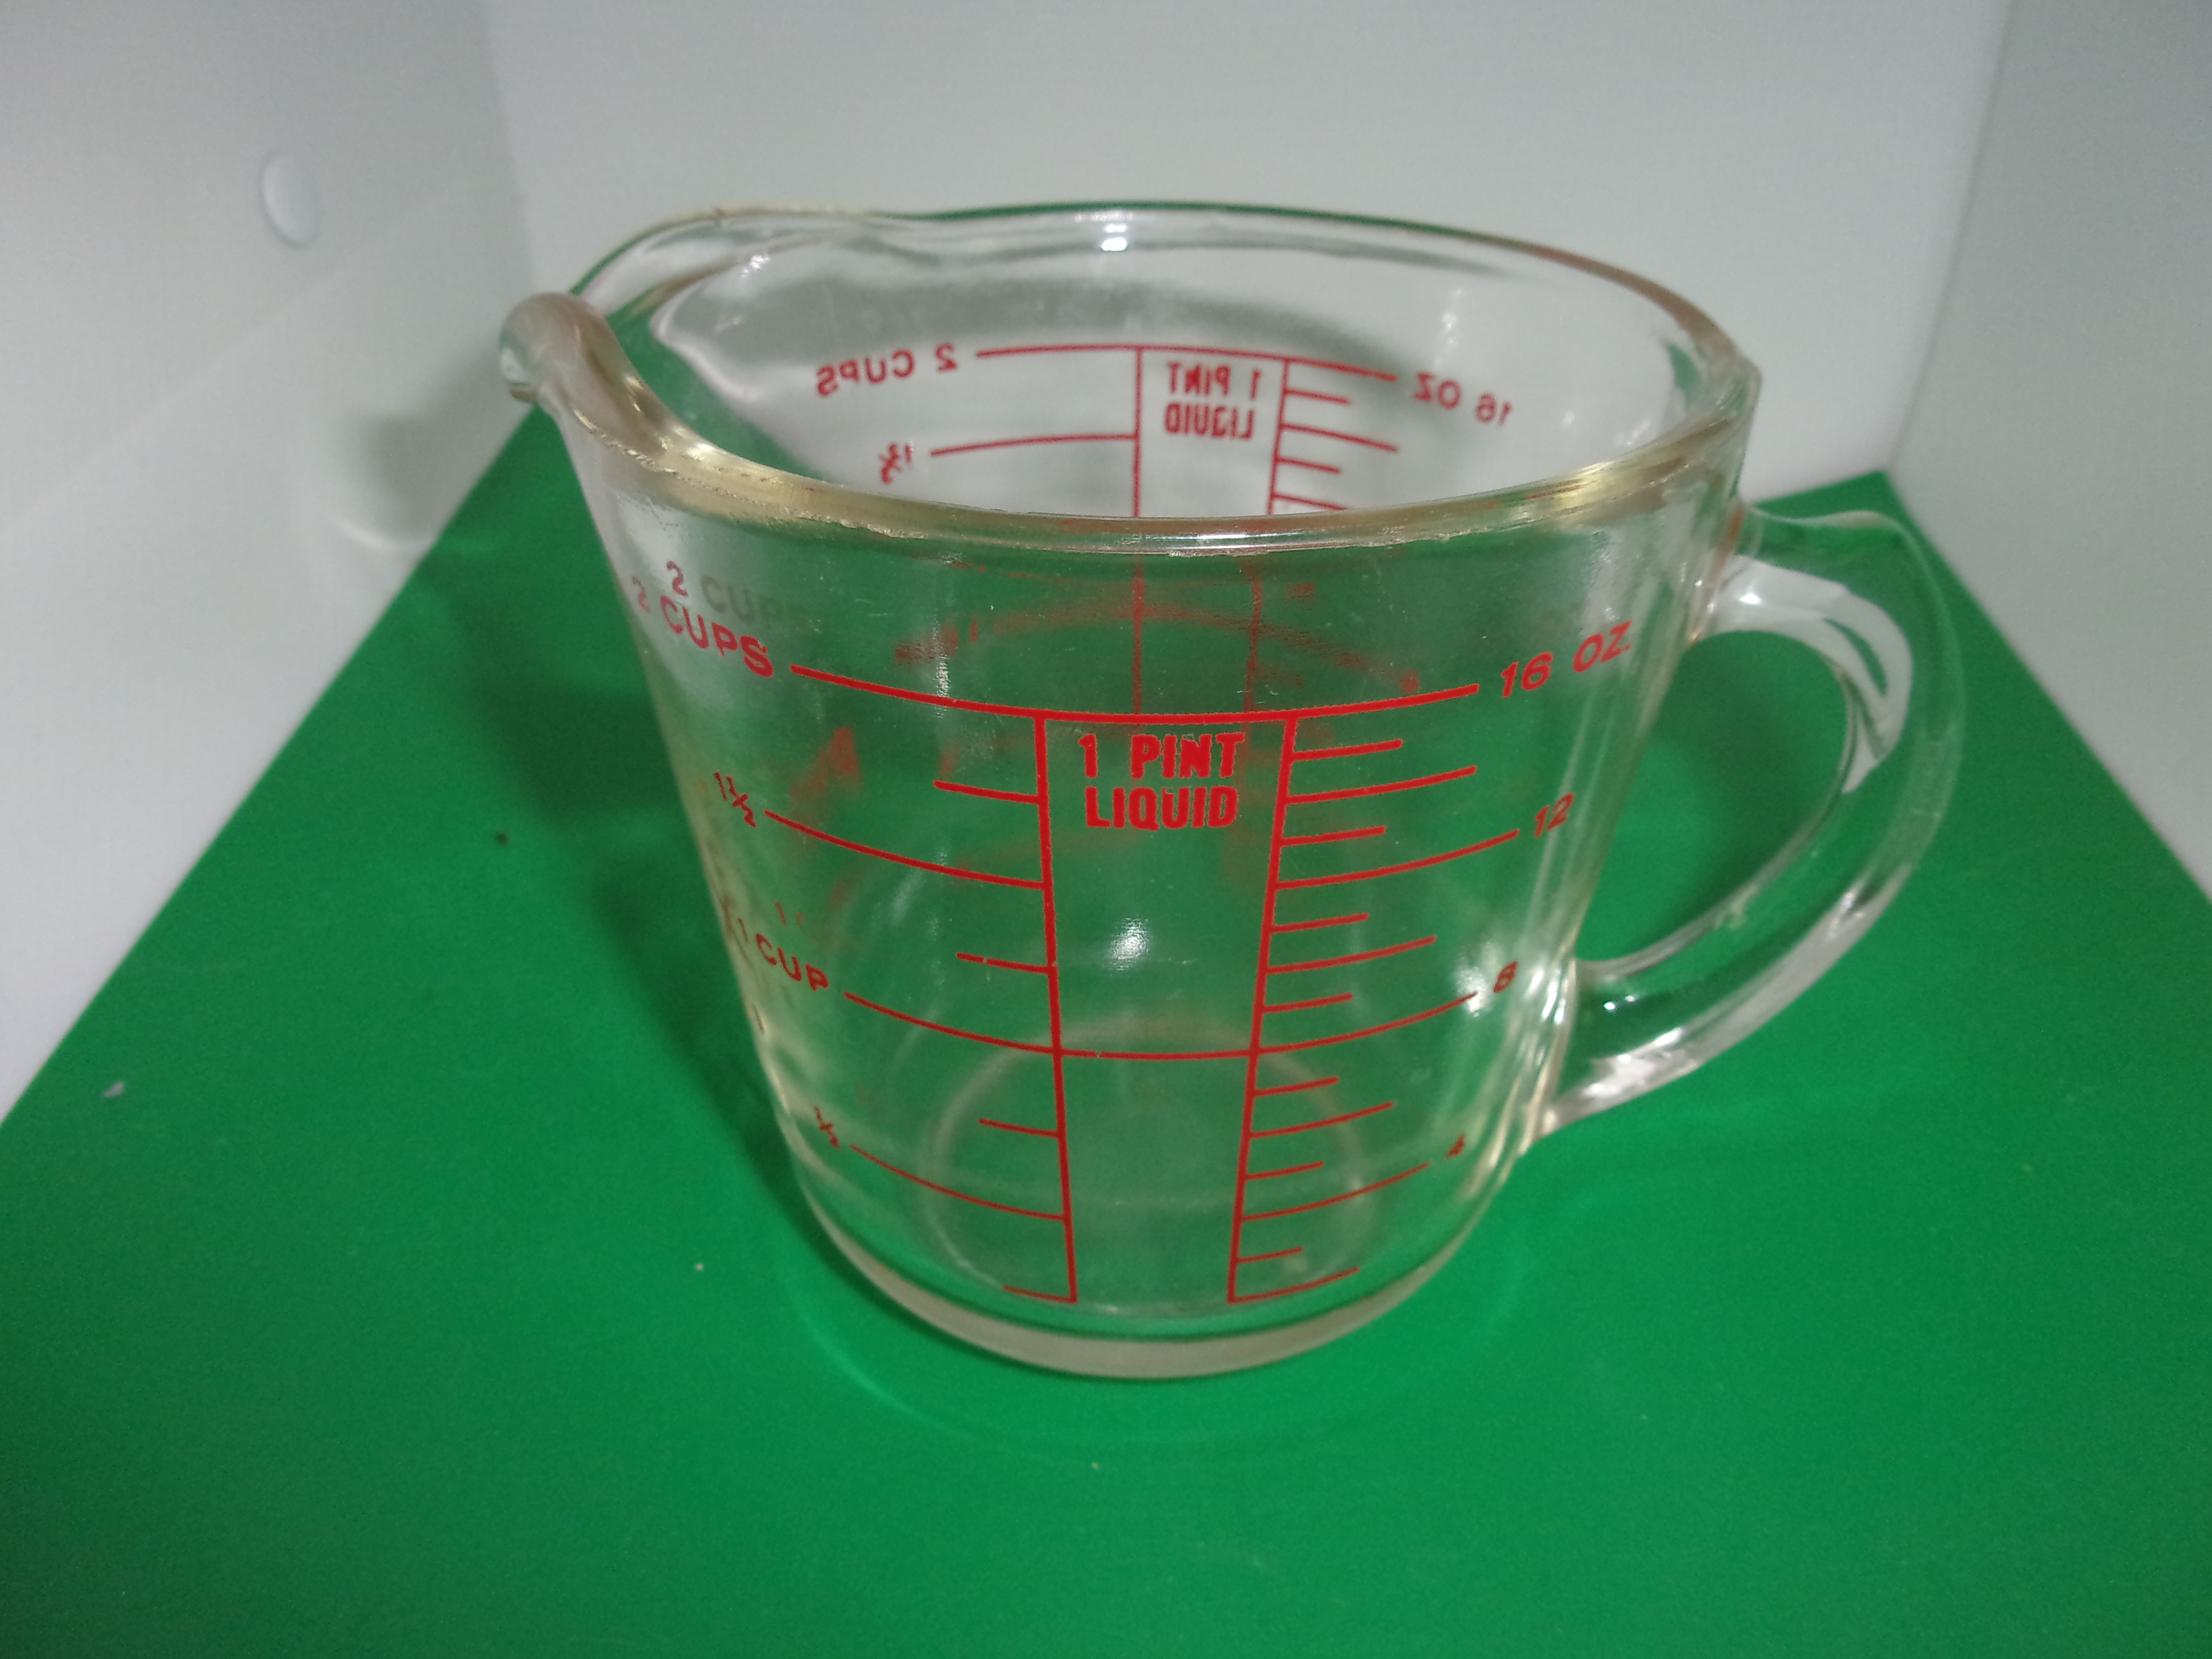 Newer Pyrex measuring cup, Made in USA: 396 ppm Cadmium on red exterior  writing